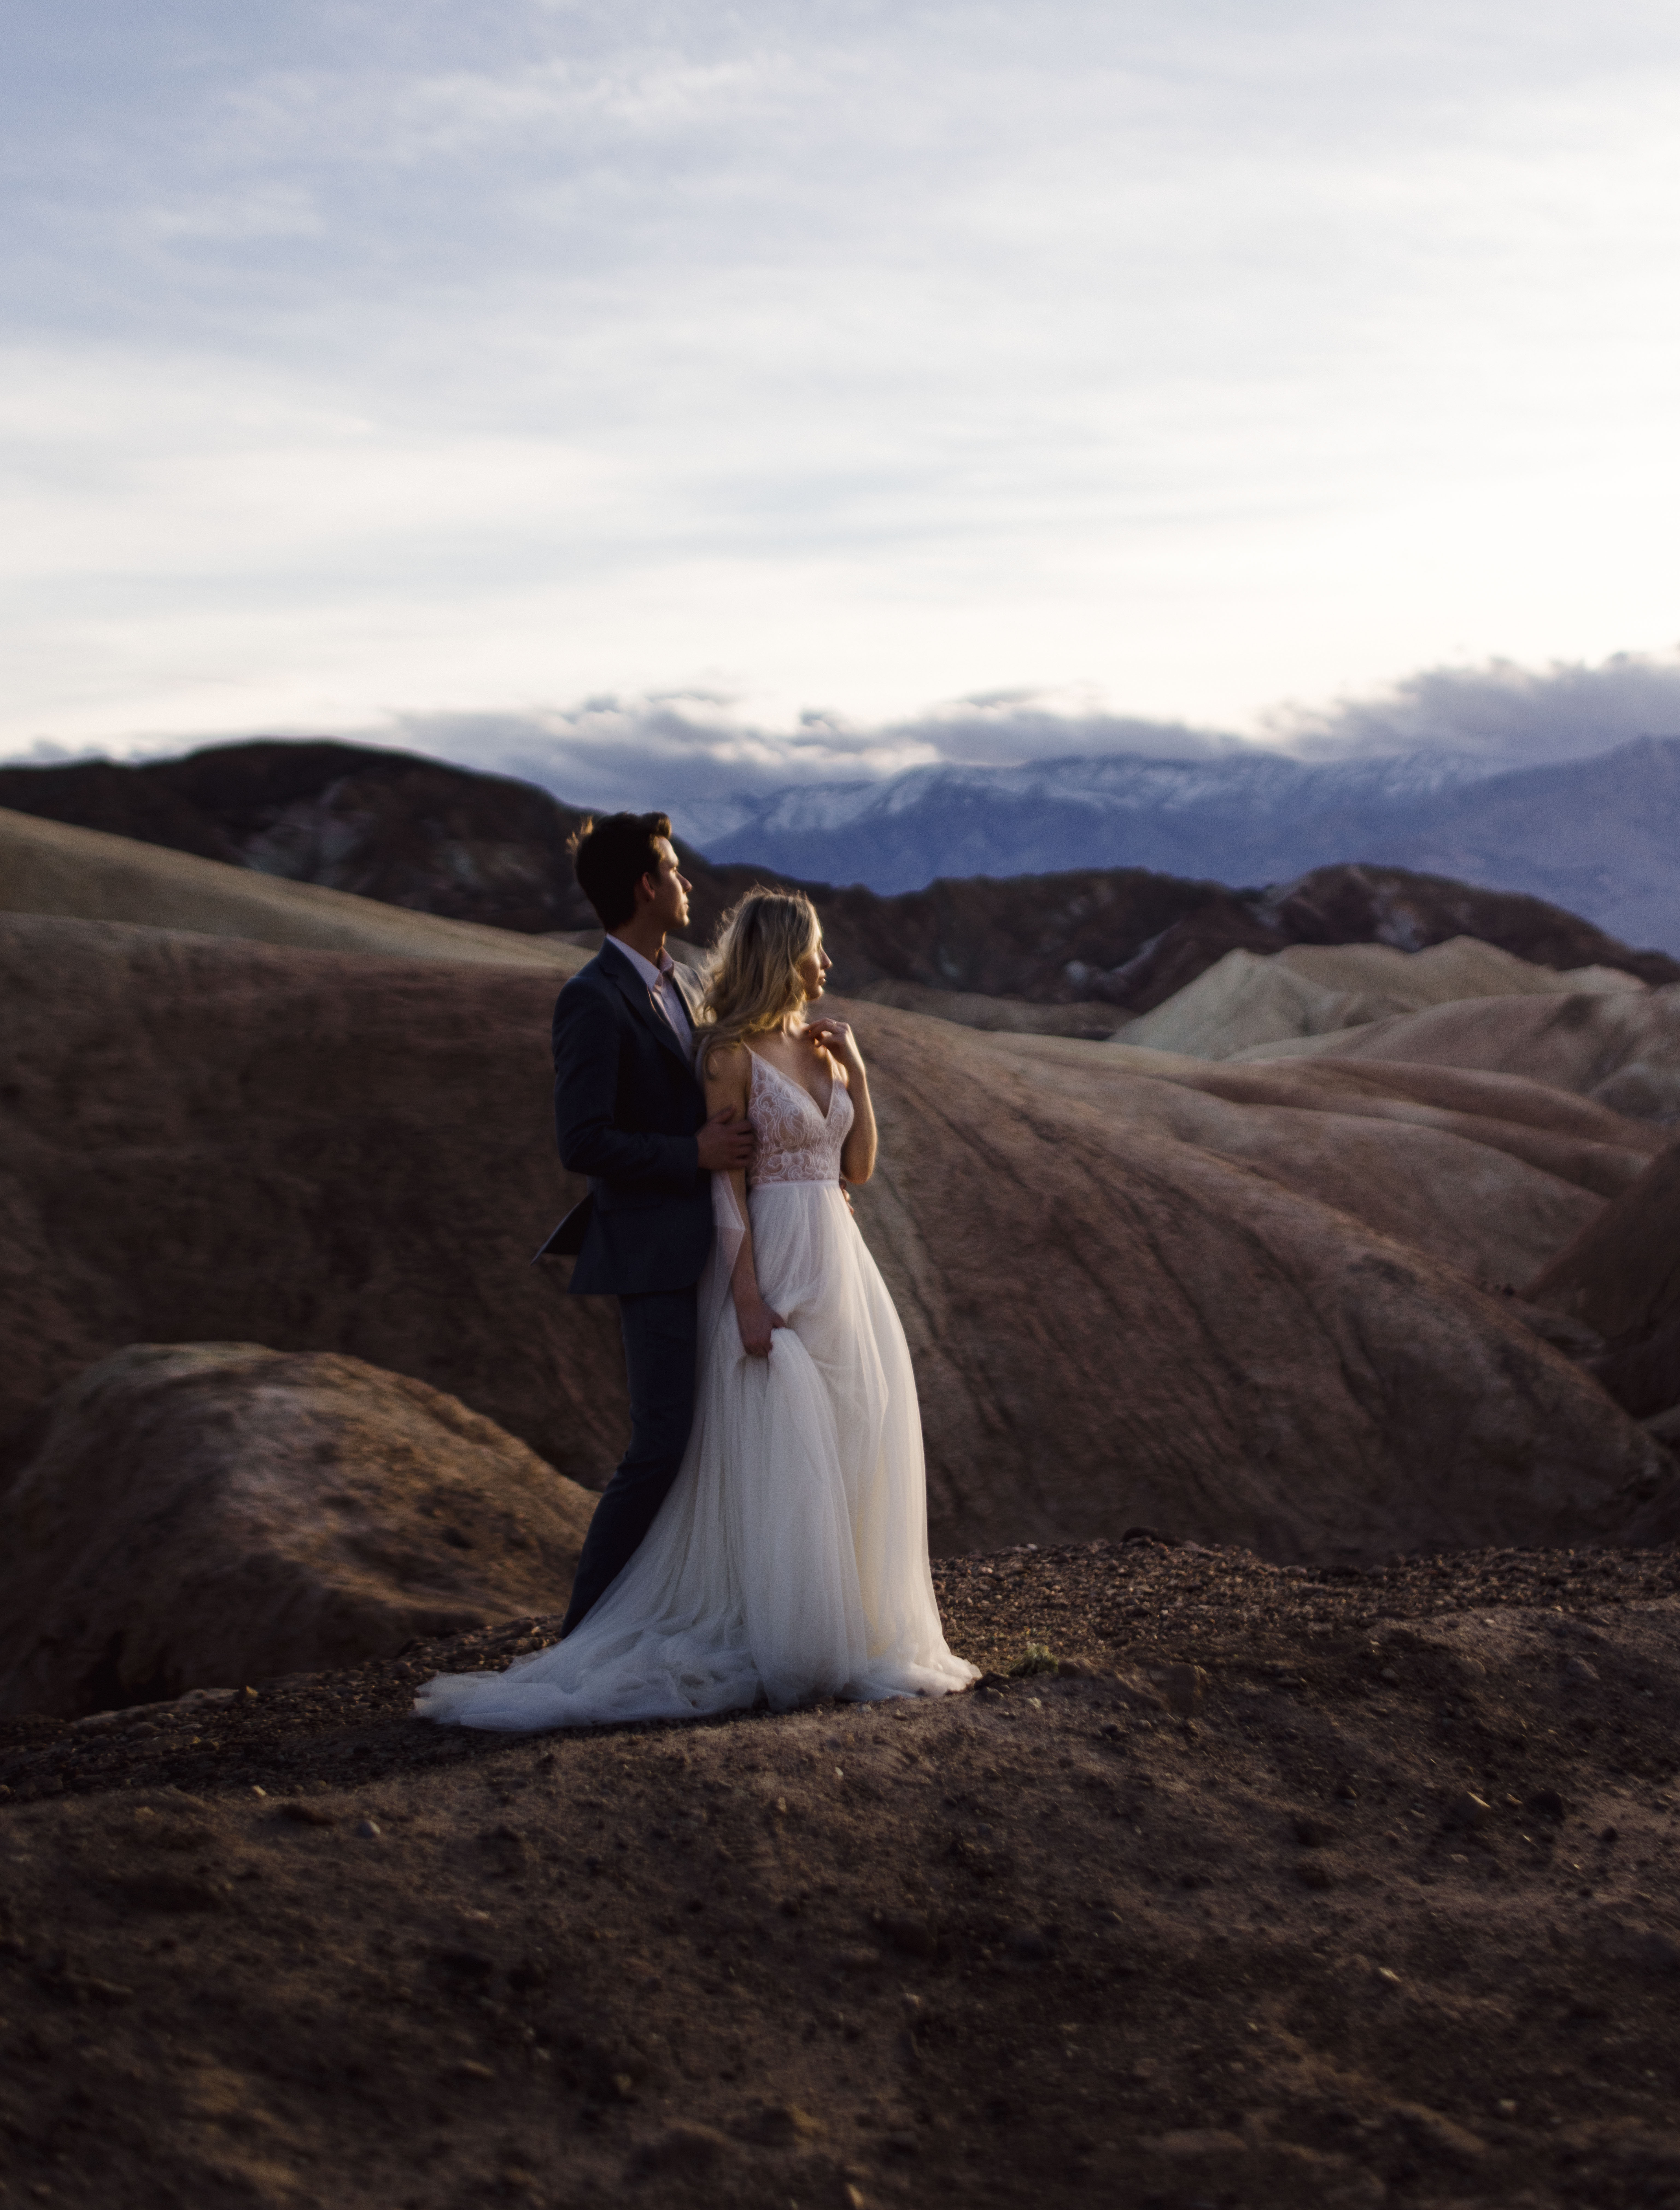 A micro wedding in the desert is a great idea if you live in California.